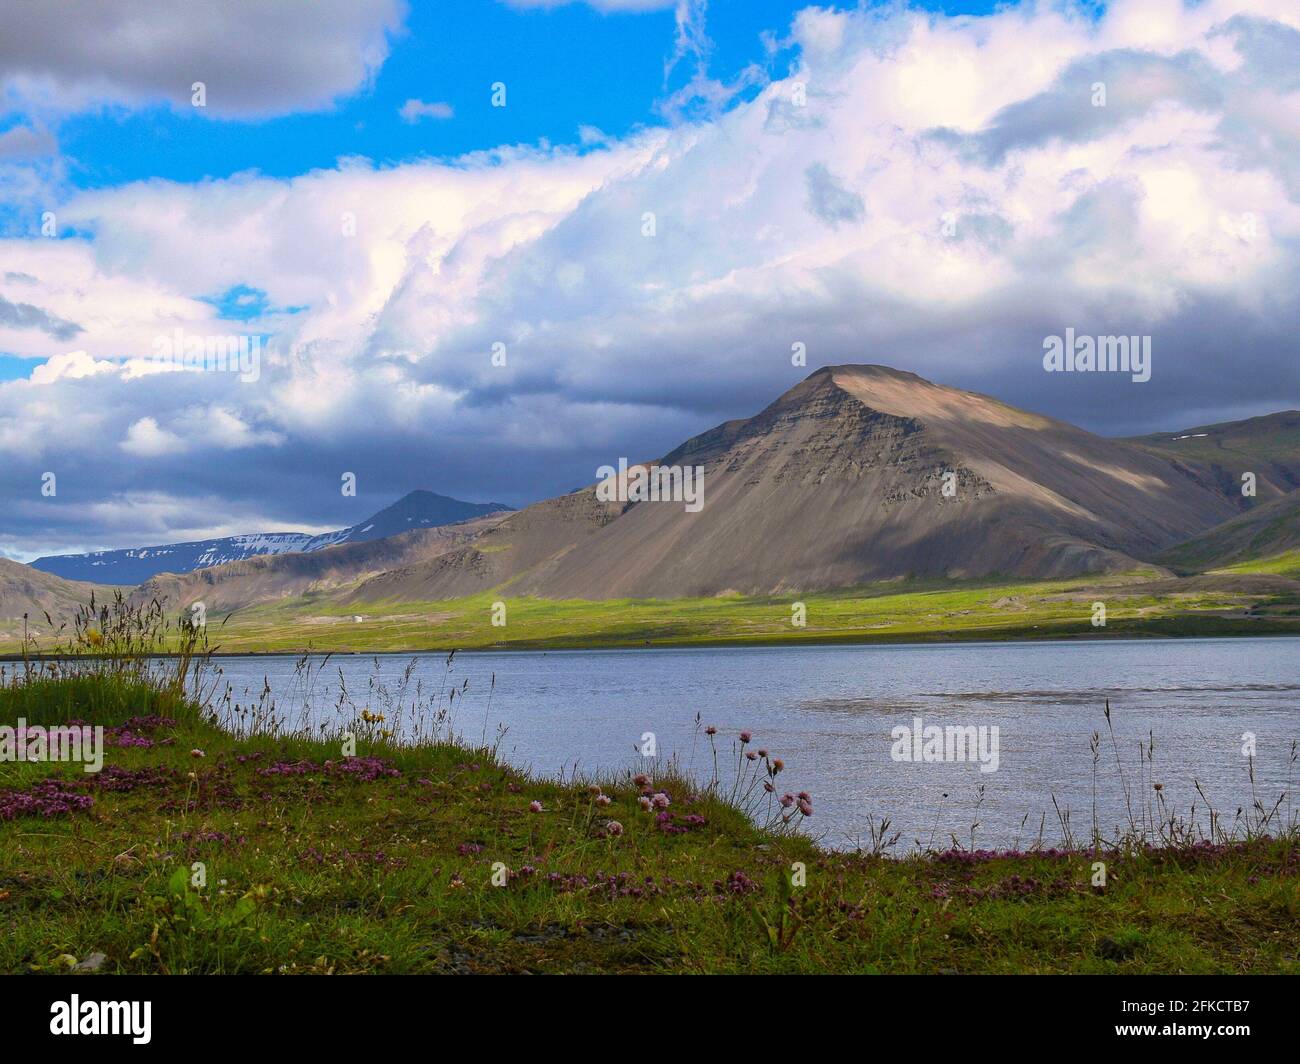 Landscape in Iceland under a cloudy sky Stock Photo